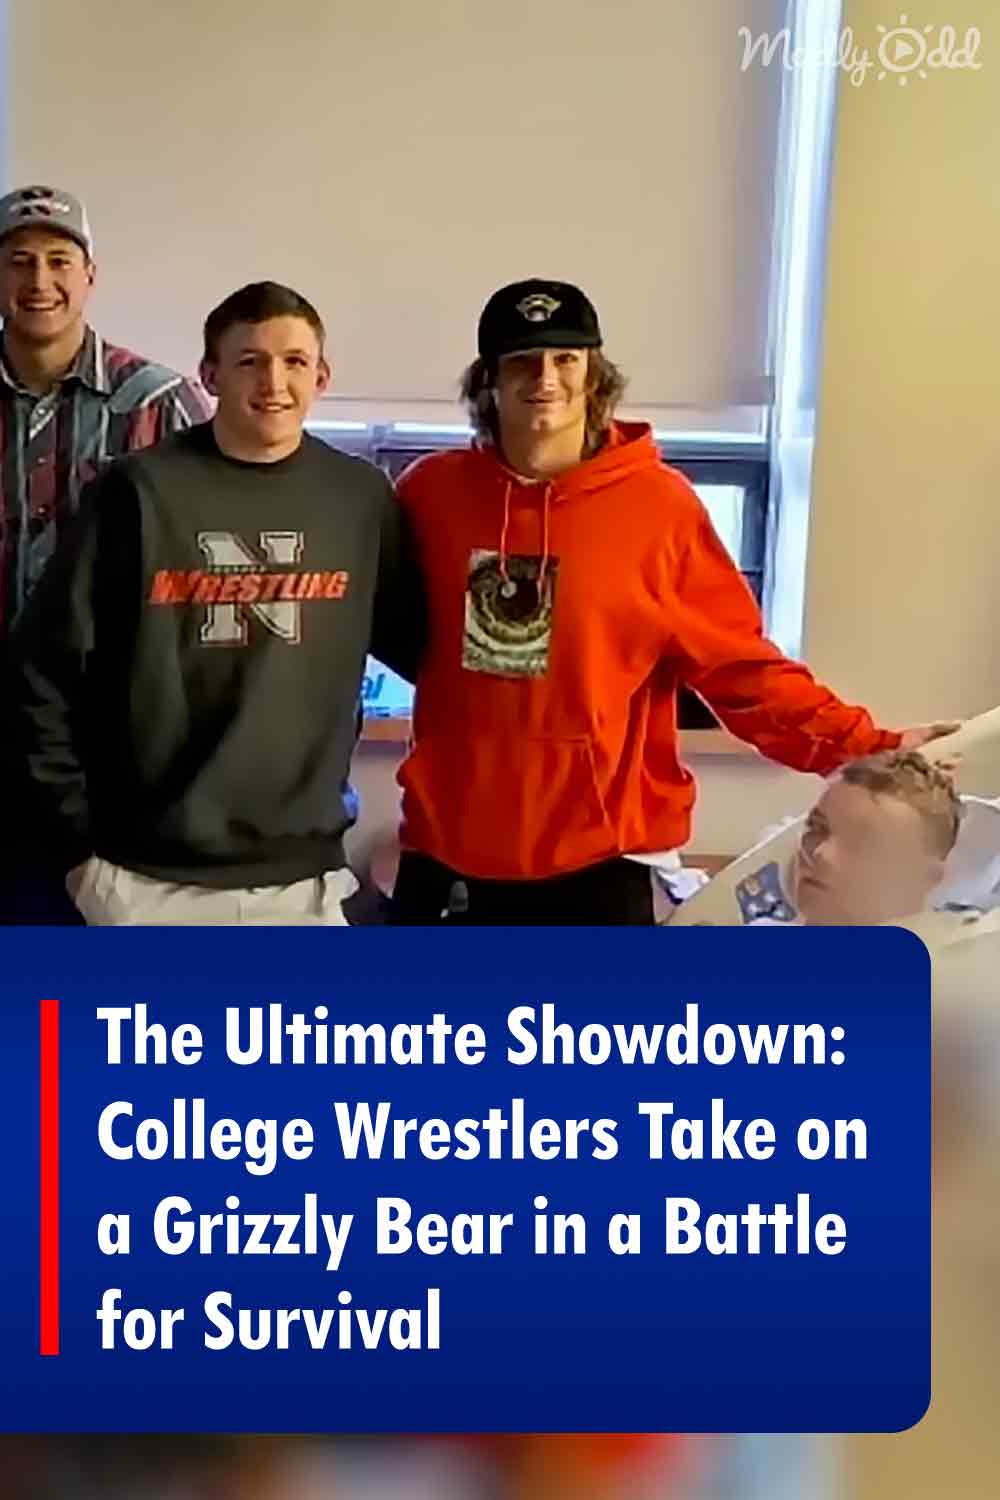 The Ultimate Showdown: College Wrestlers Take on a Grizzly Bear in a Battle for Survival